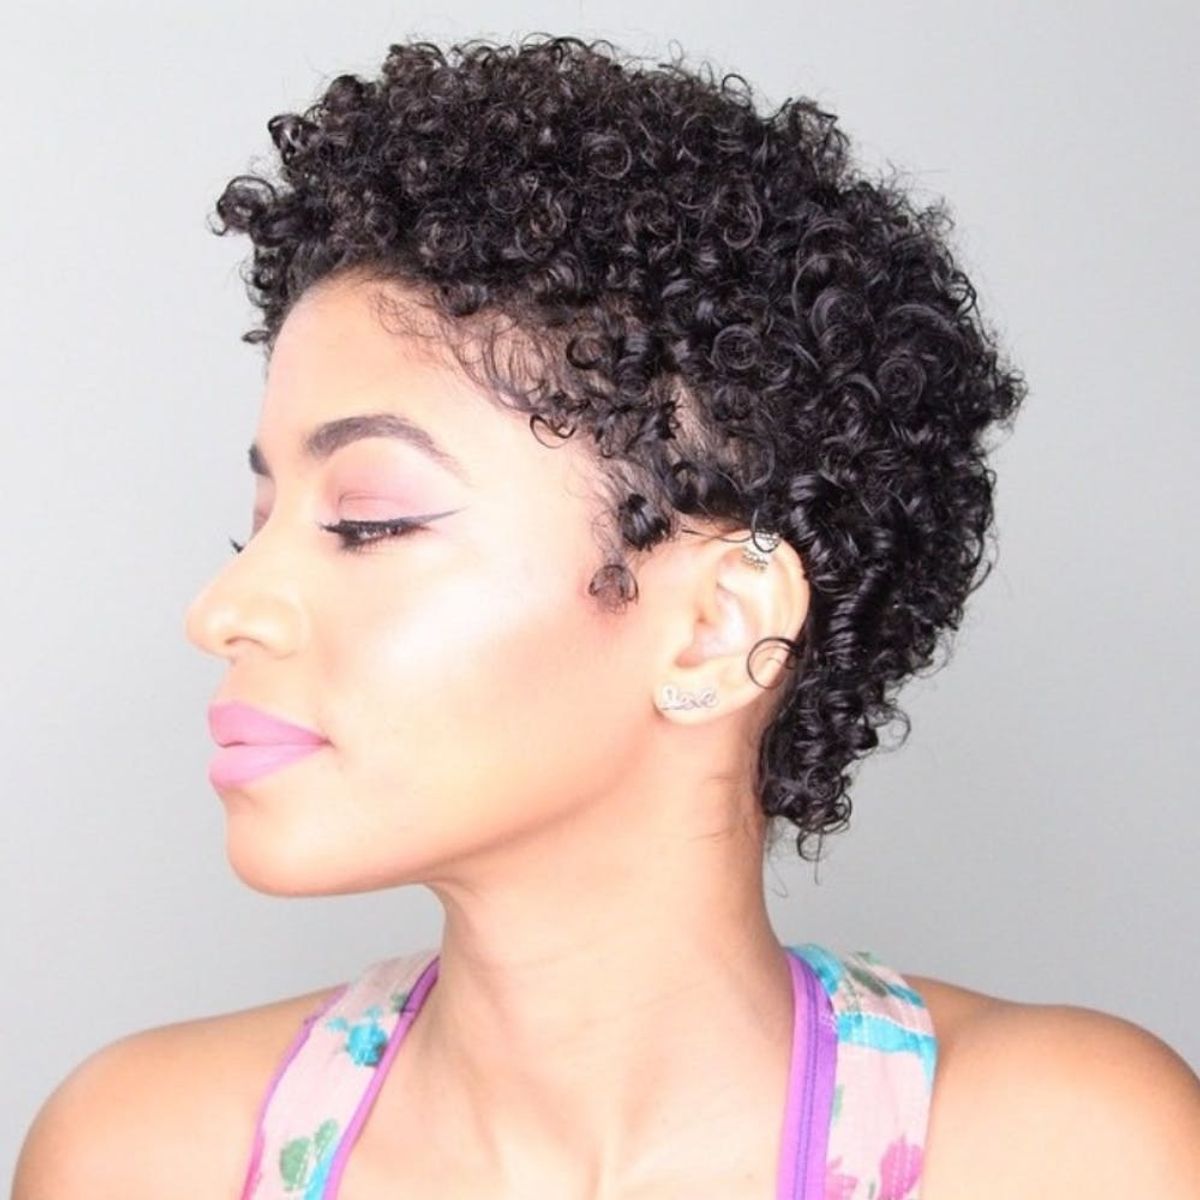 16 Short Hairstyles That Will Inspire You to Chop It All Off